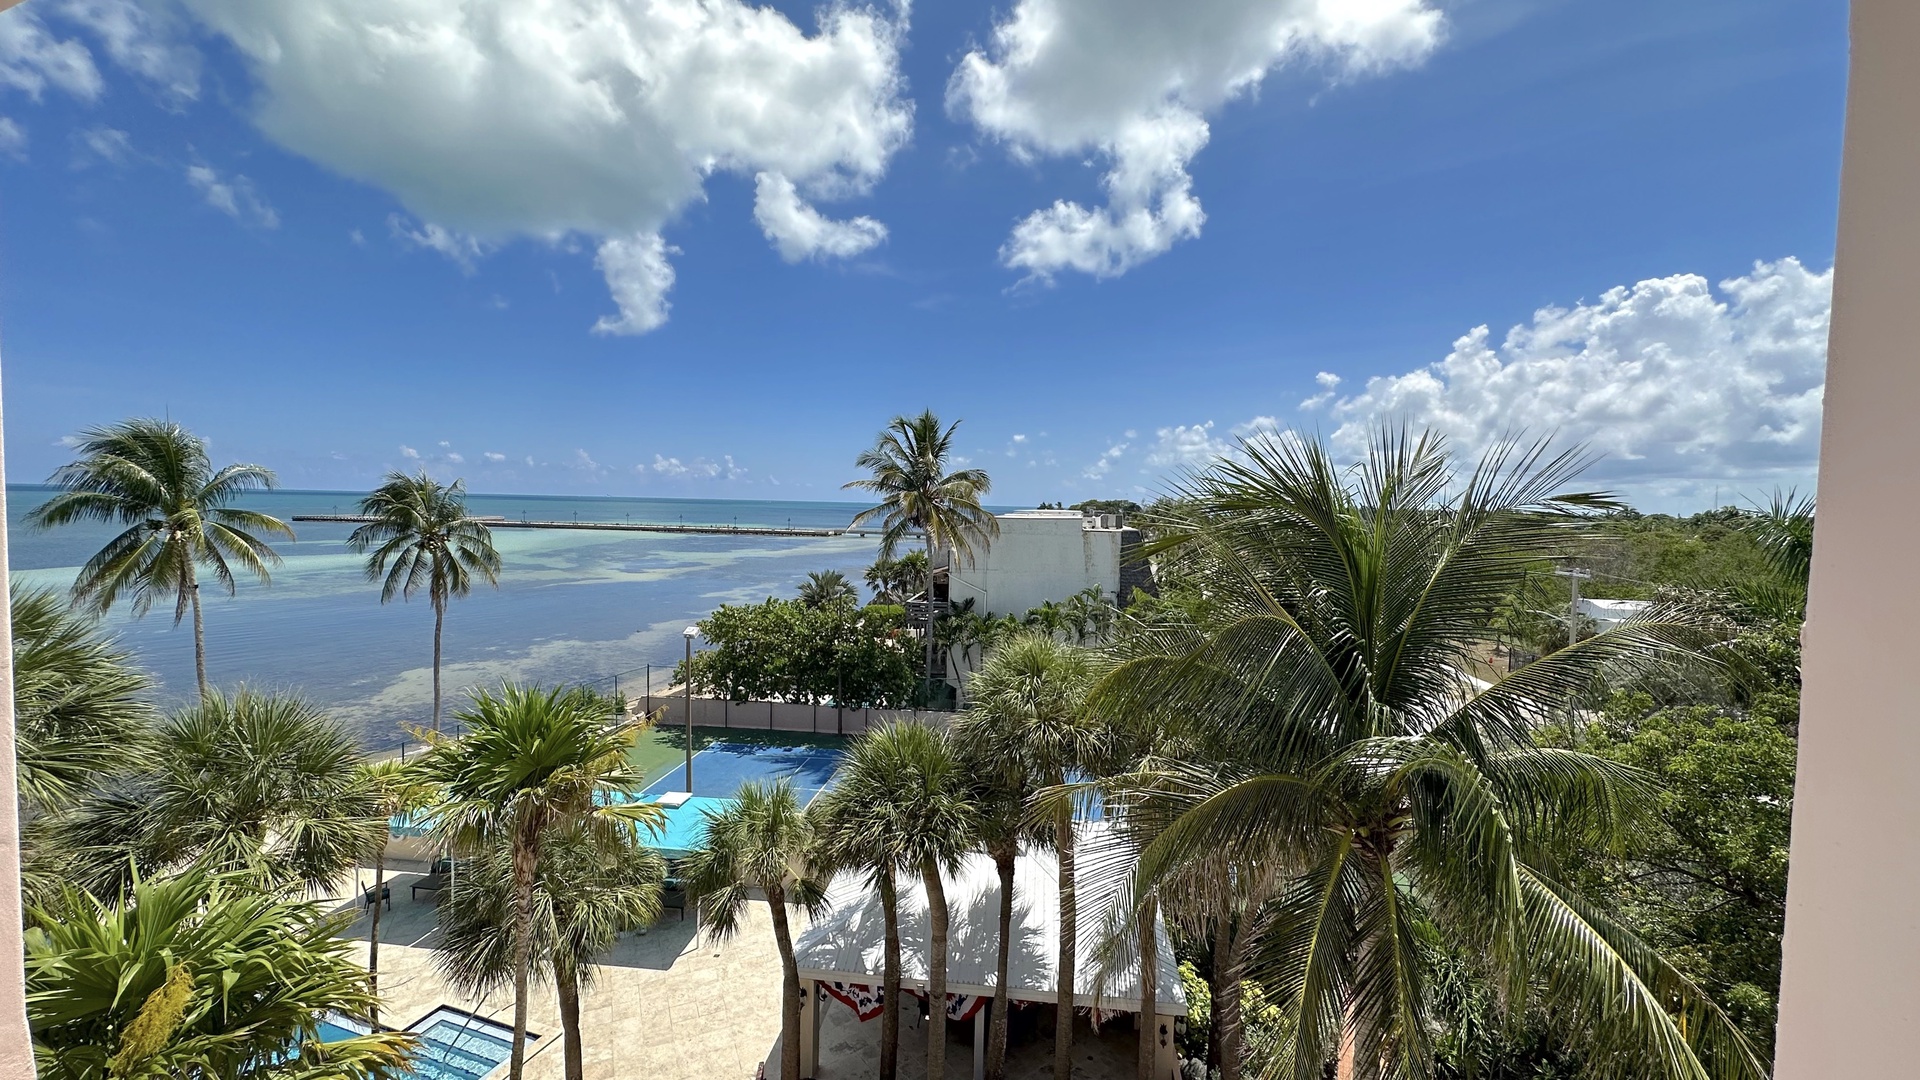 West View with ocean from walkway Key West Beach Club Paradise Penthouse #401